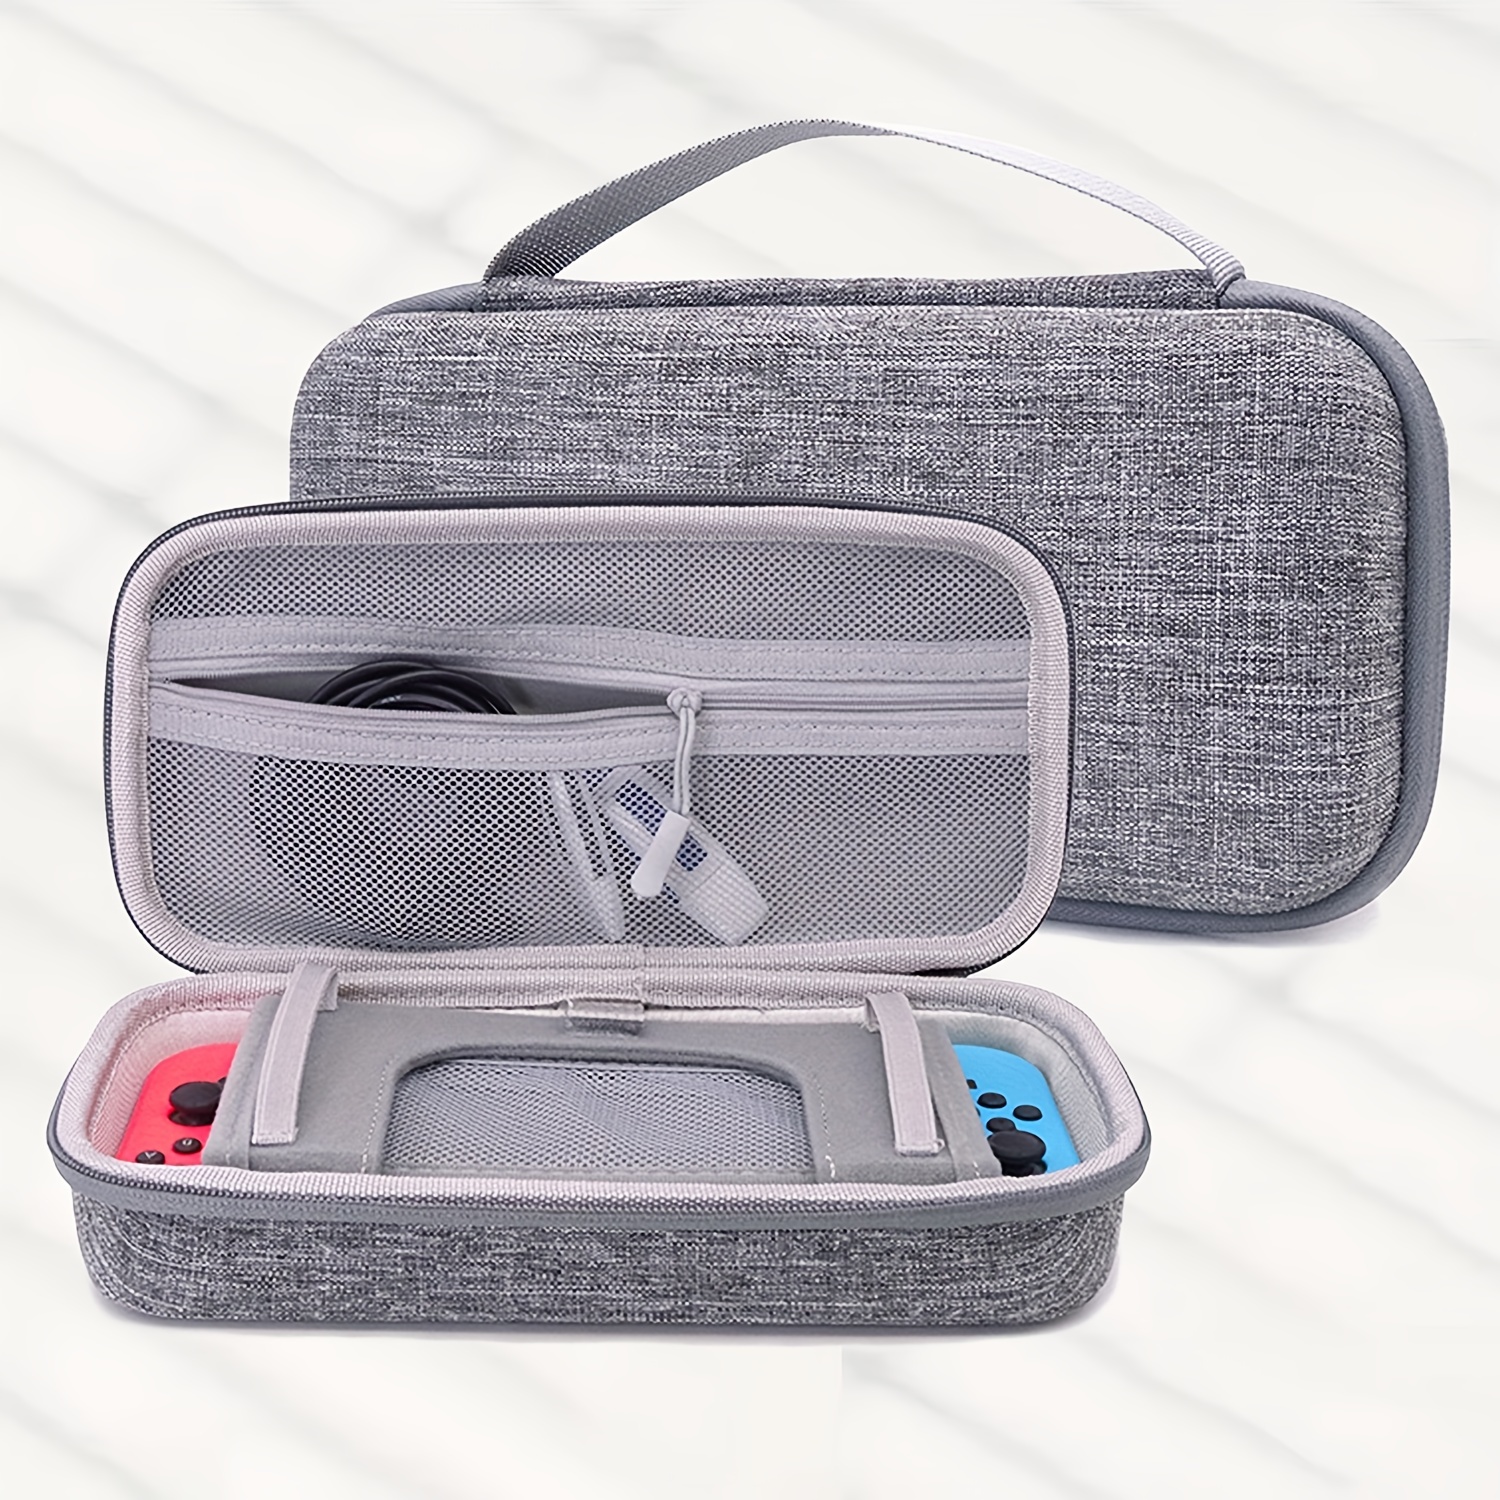 Miniature carrying case, Storage/Travel/Transport Cases